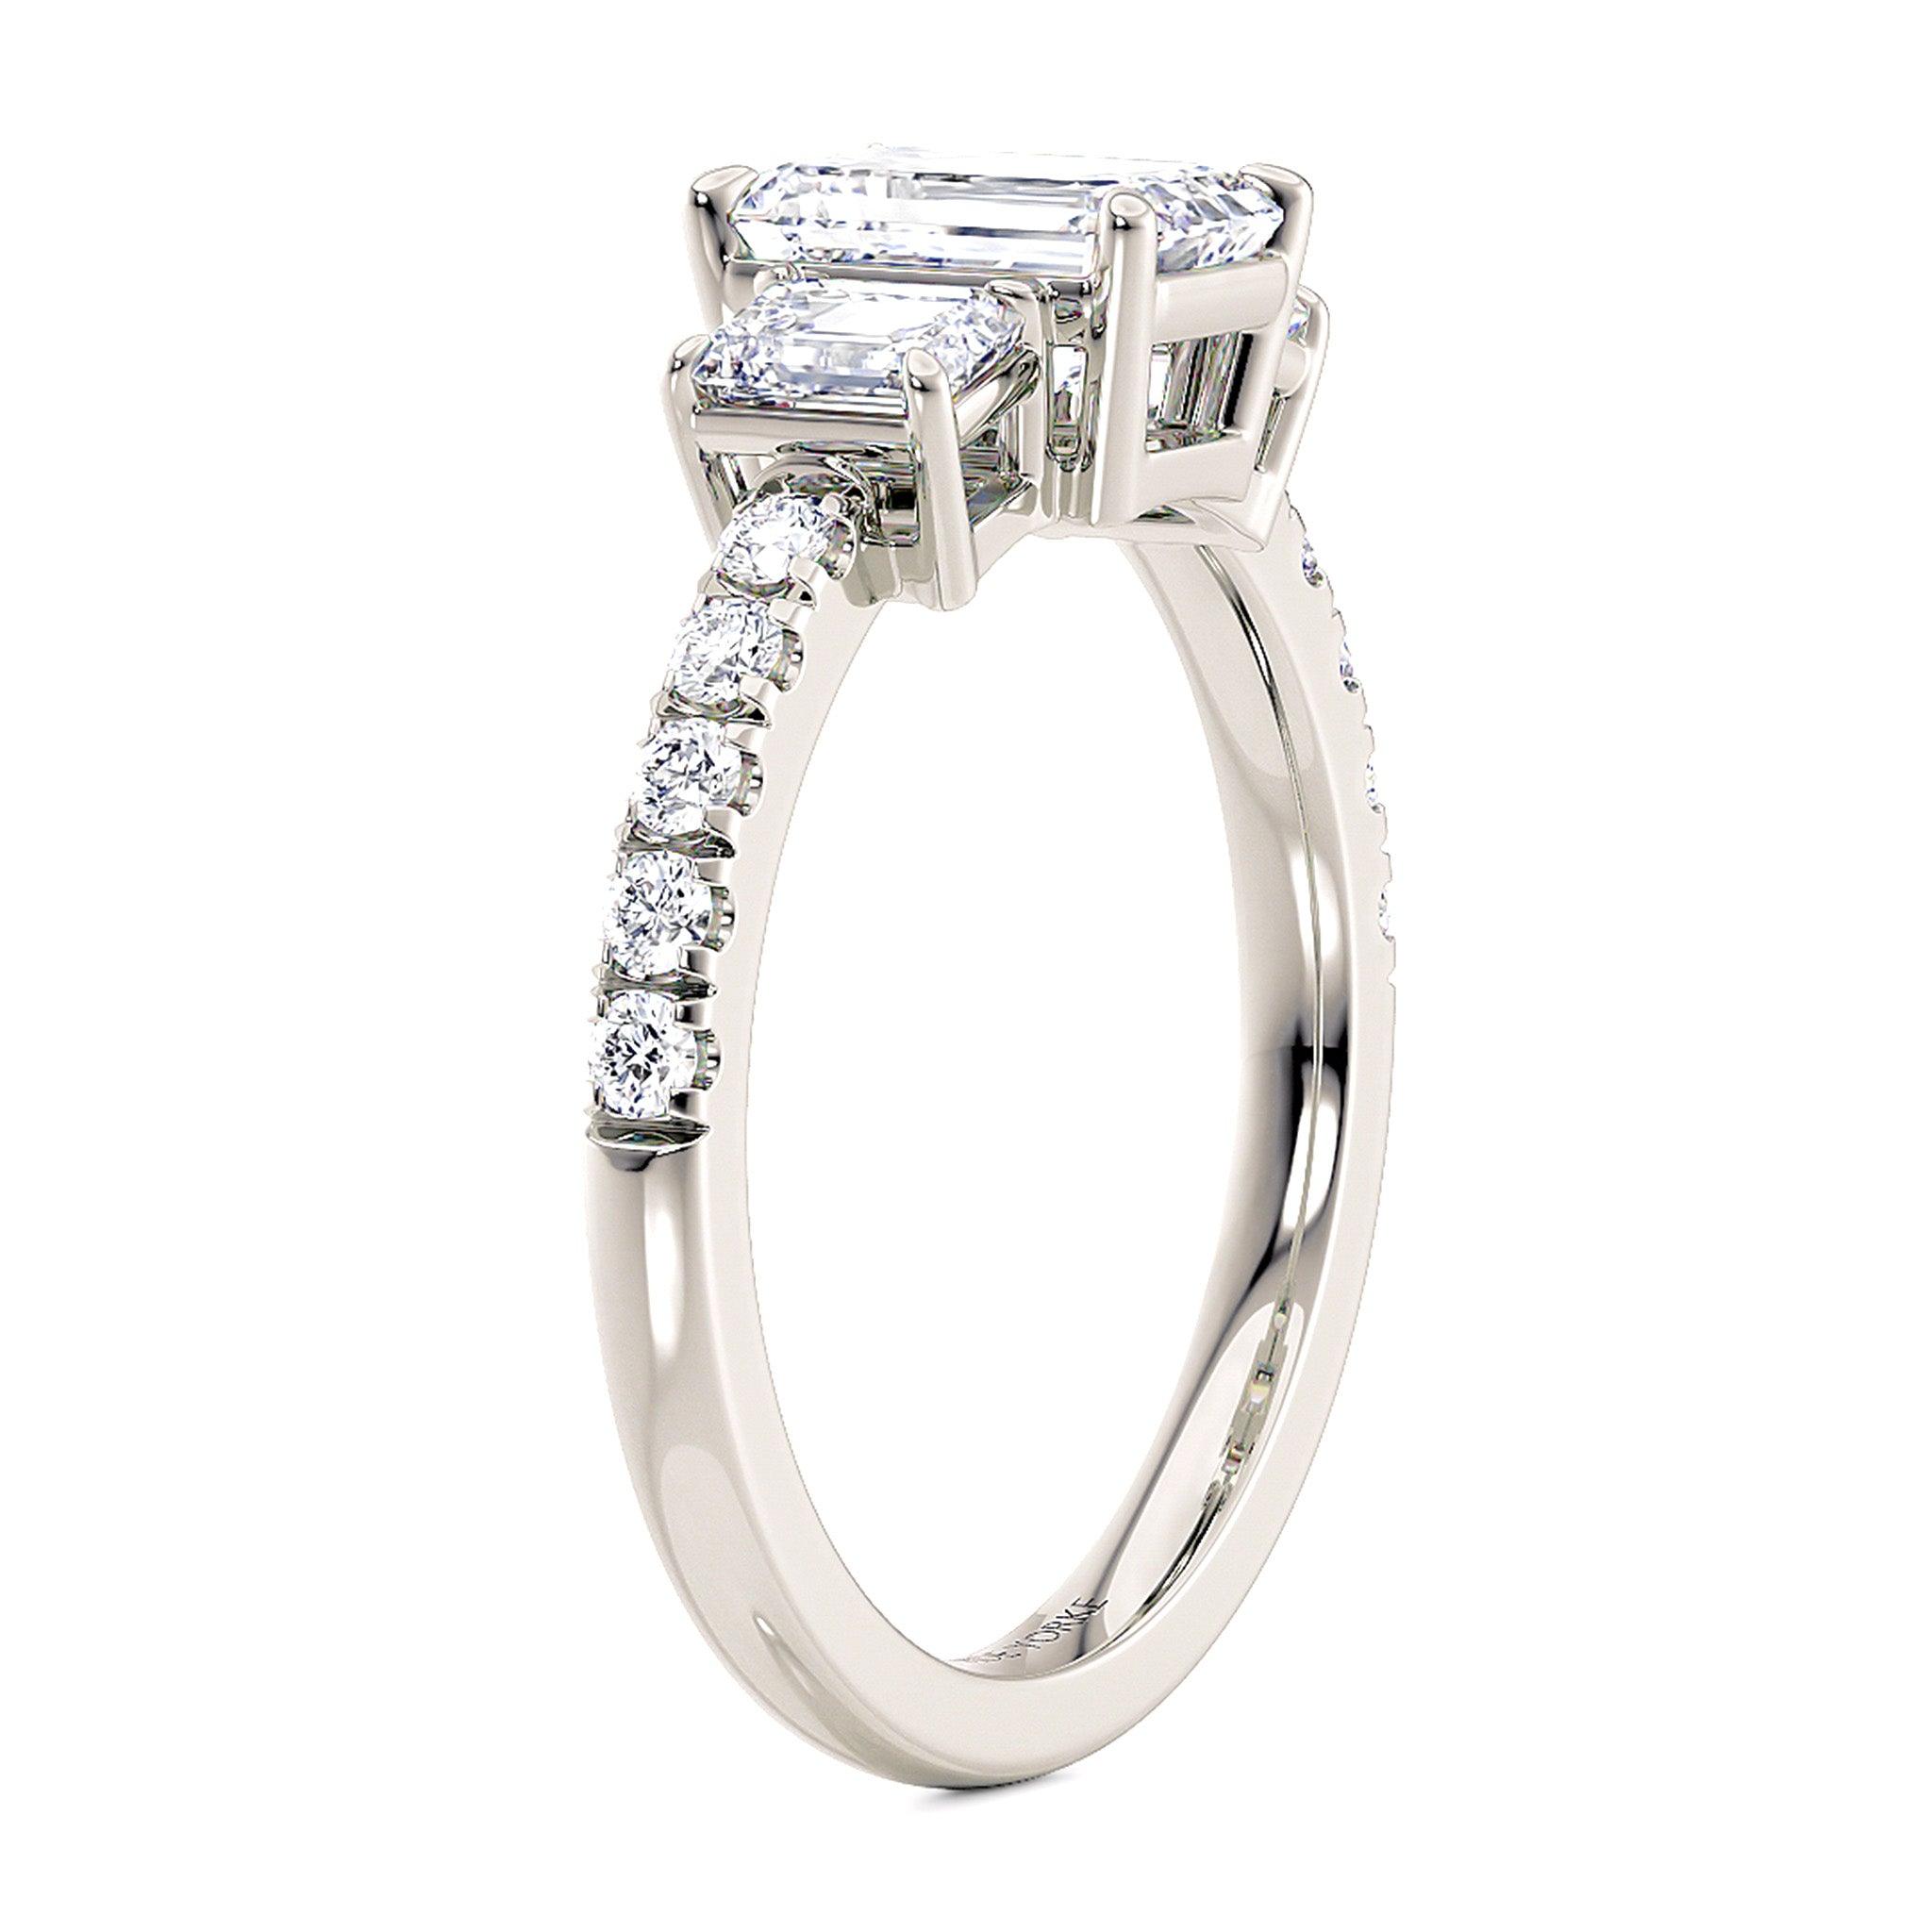 Adele emerald cut three diamond in platinum.  Side view showing 